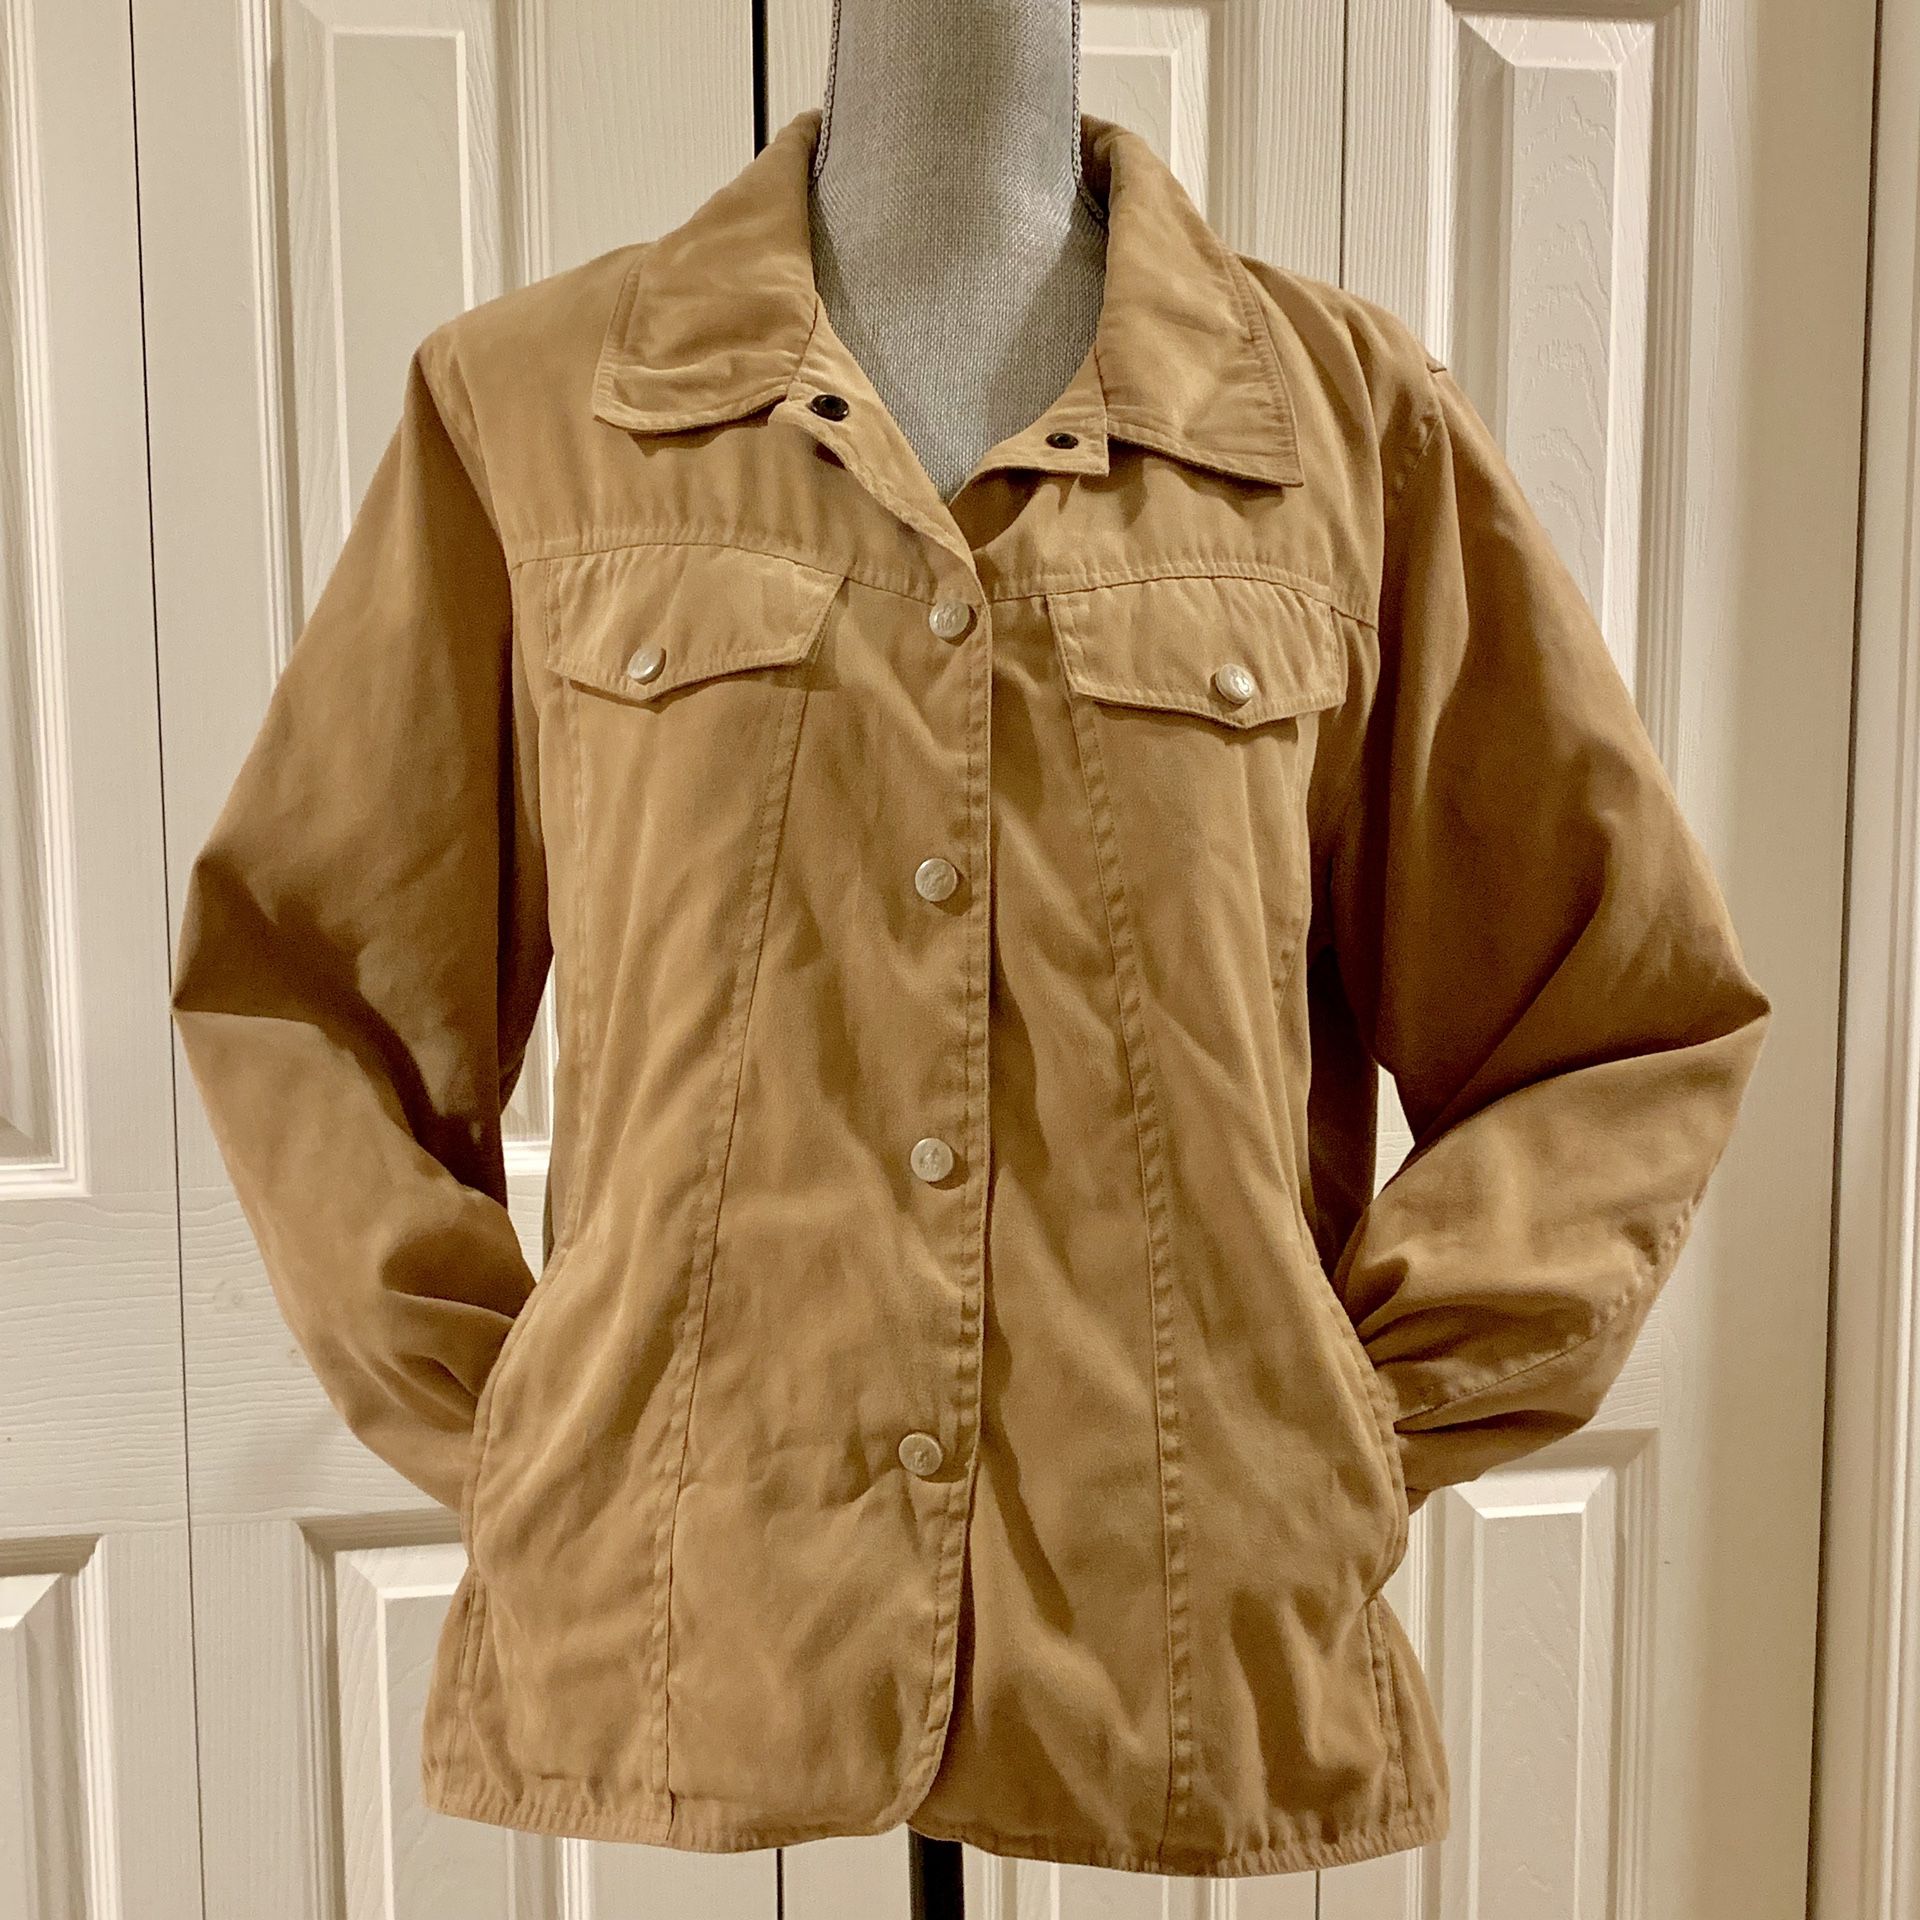 OUTBACK TRADING COMPANY Women's Microsuede Tan Western JACKET Size Large L